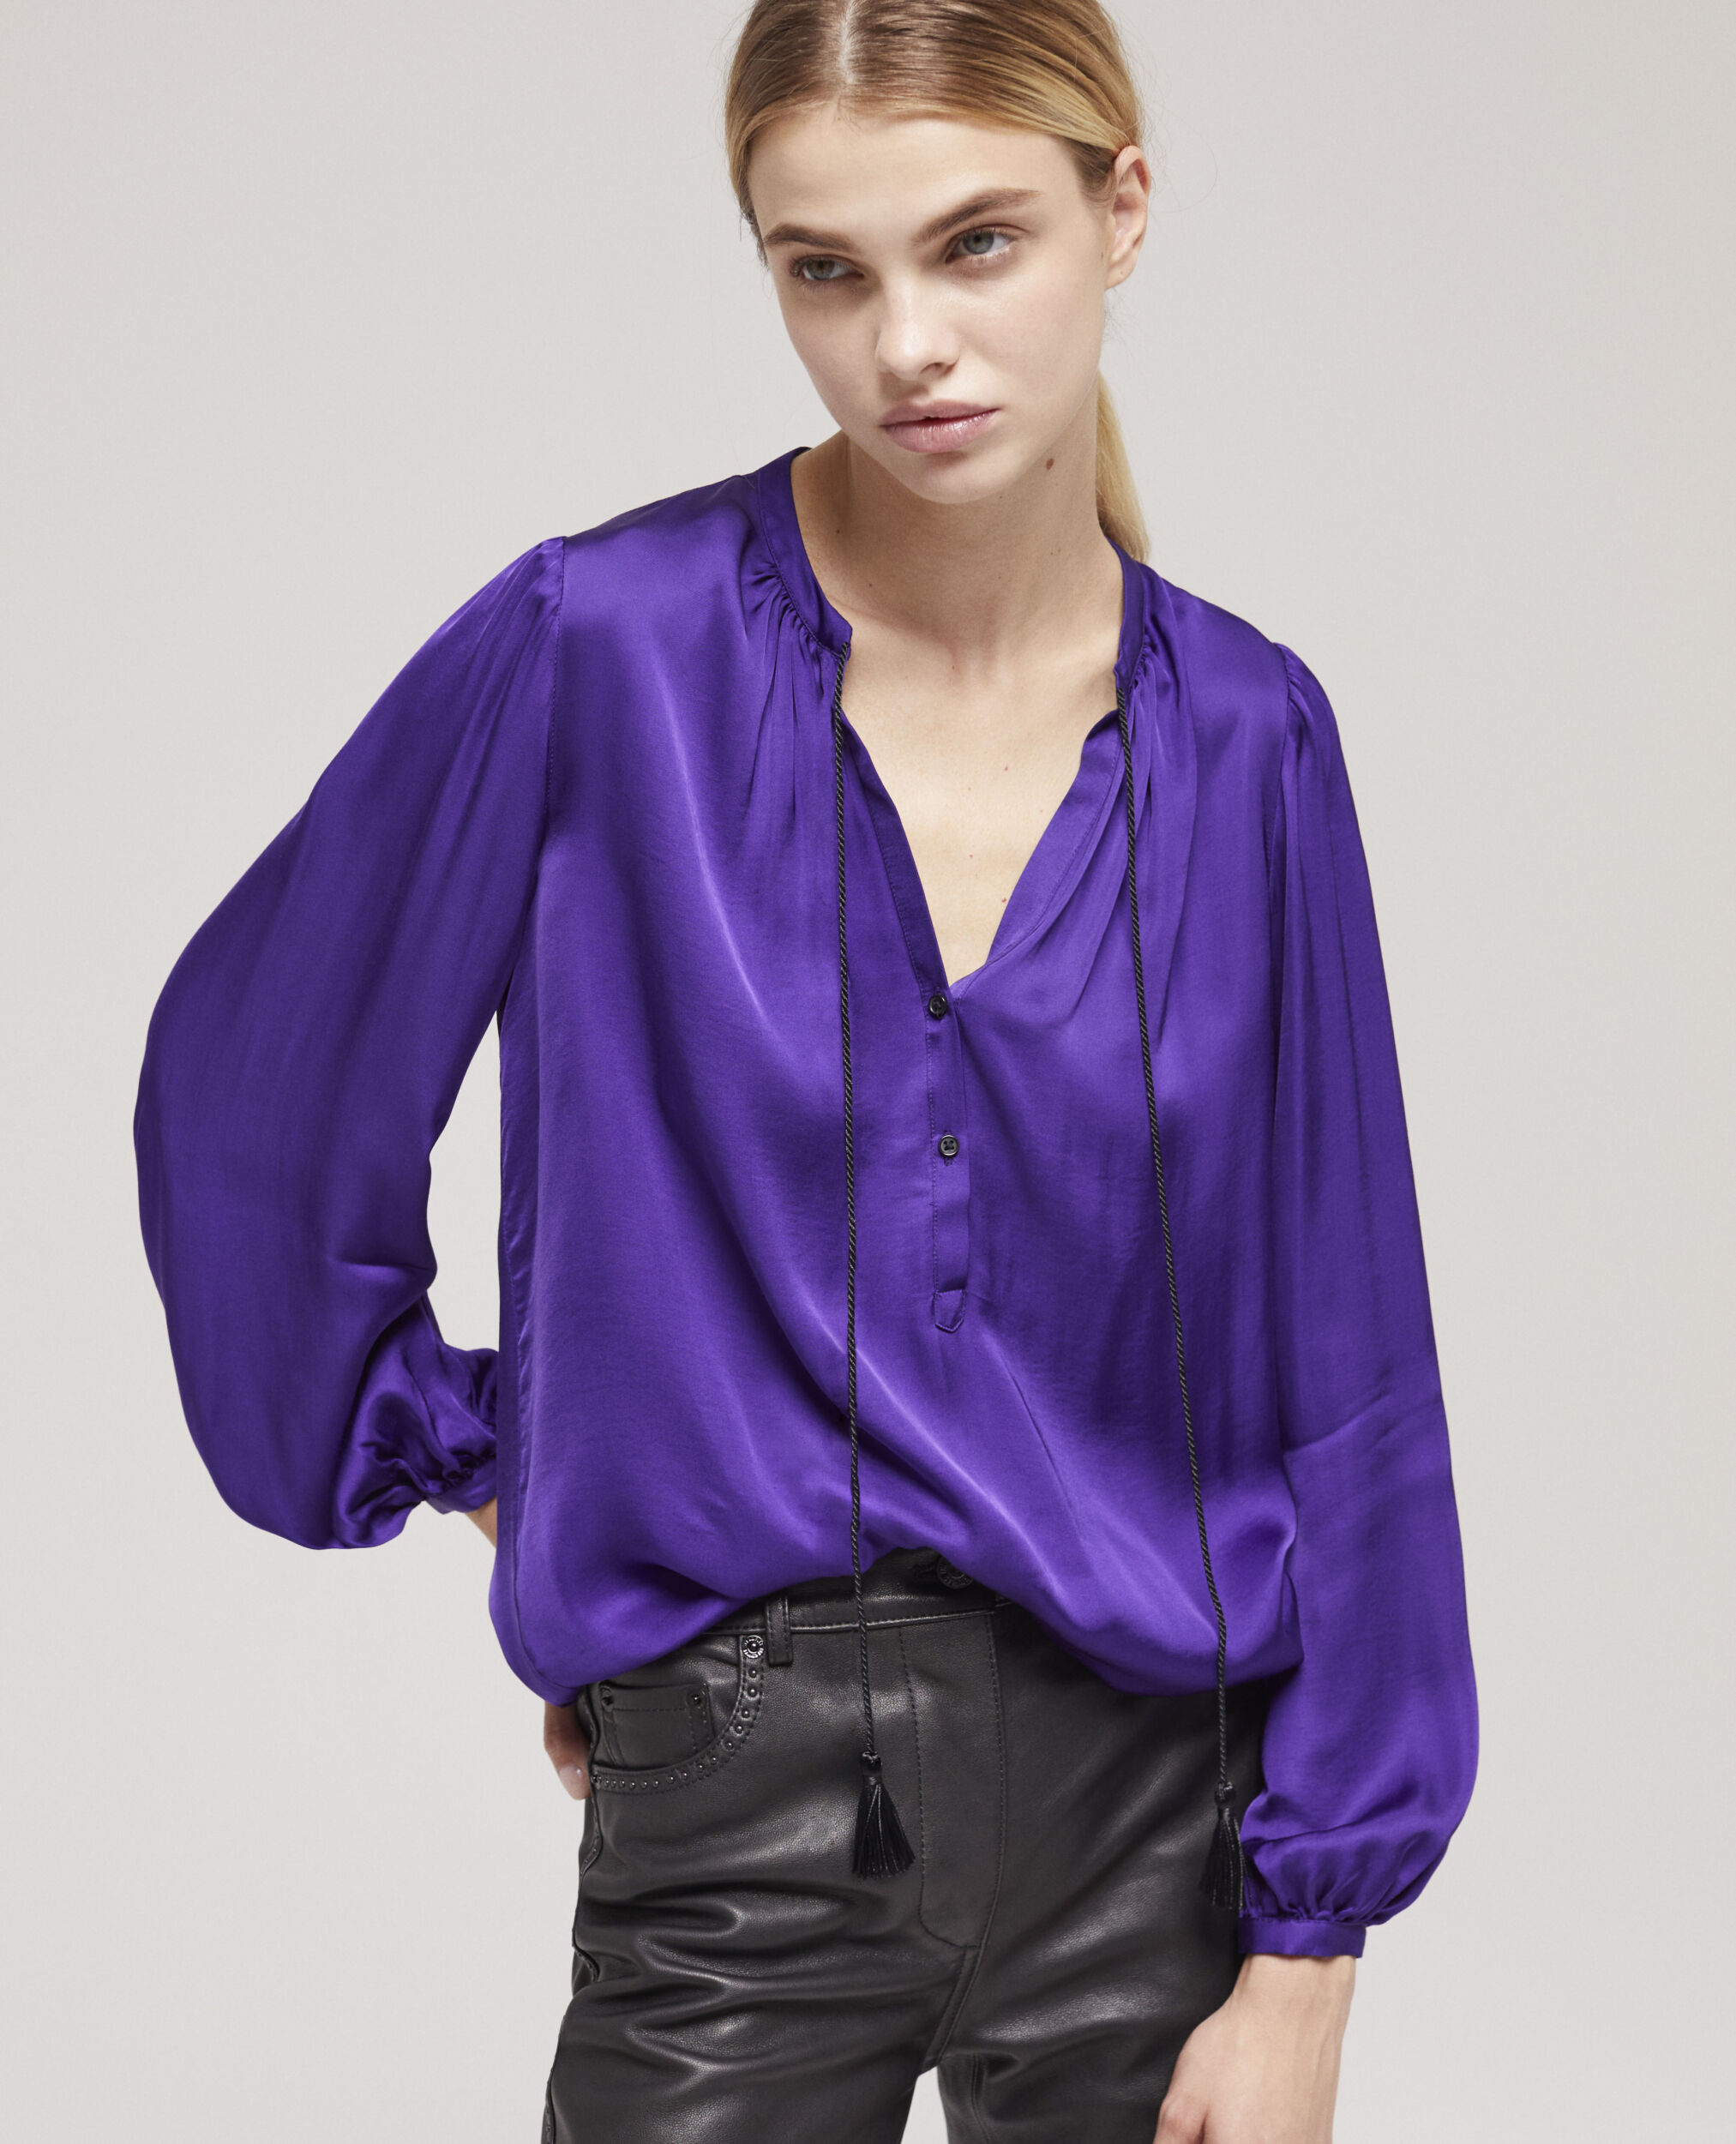 Chemise manches bouffantes violette, PURPLE, hi-res image number null